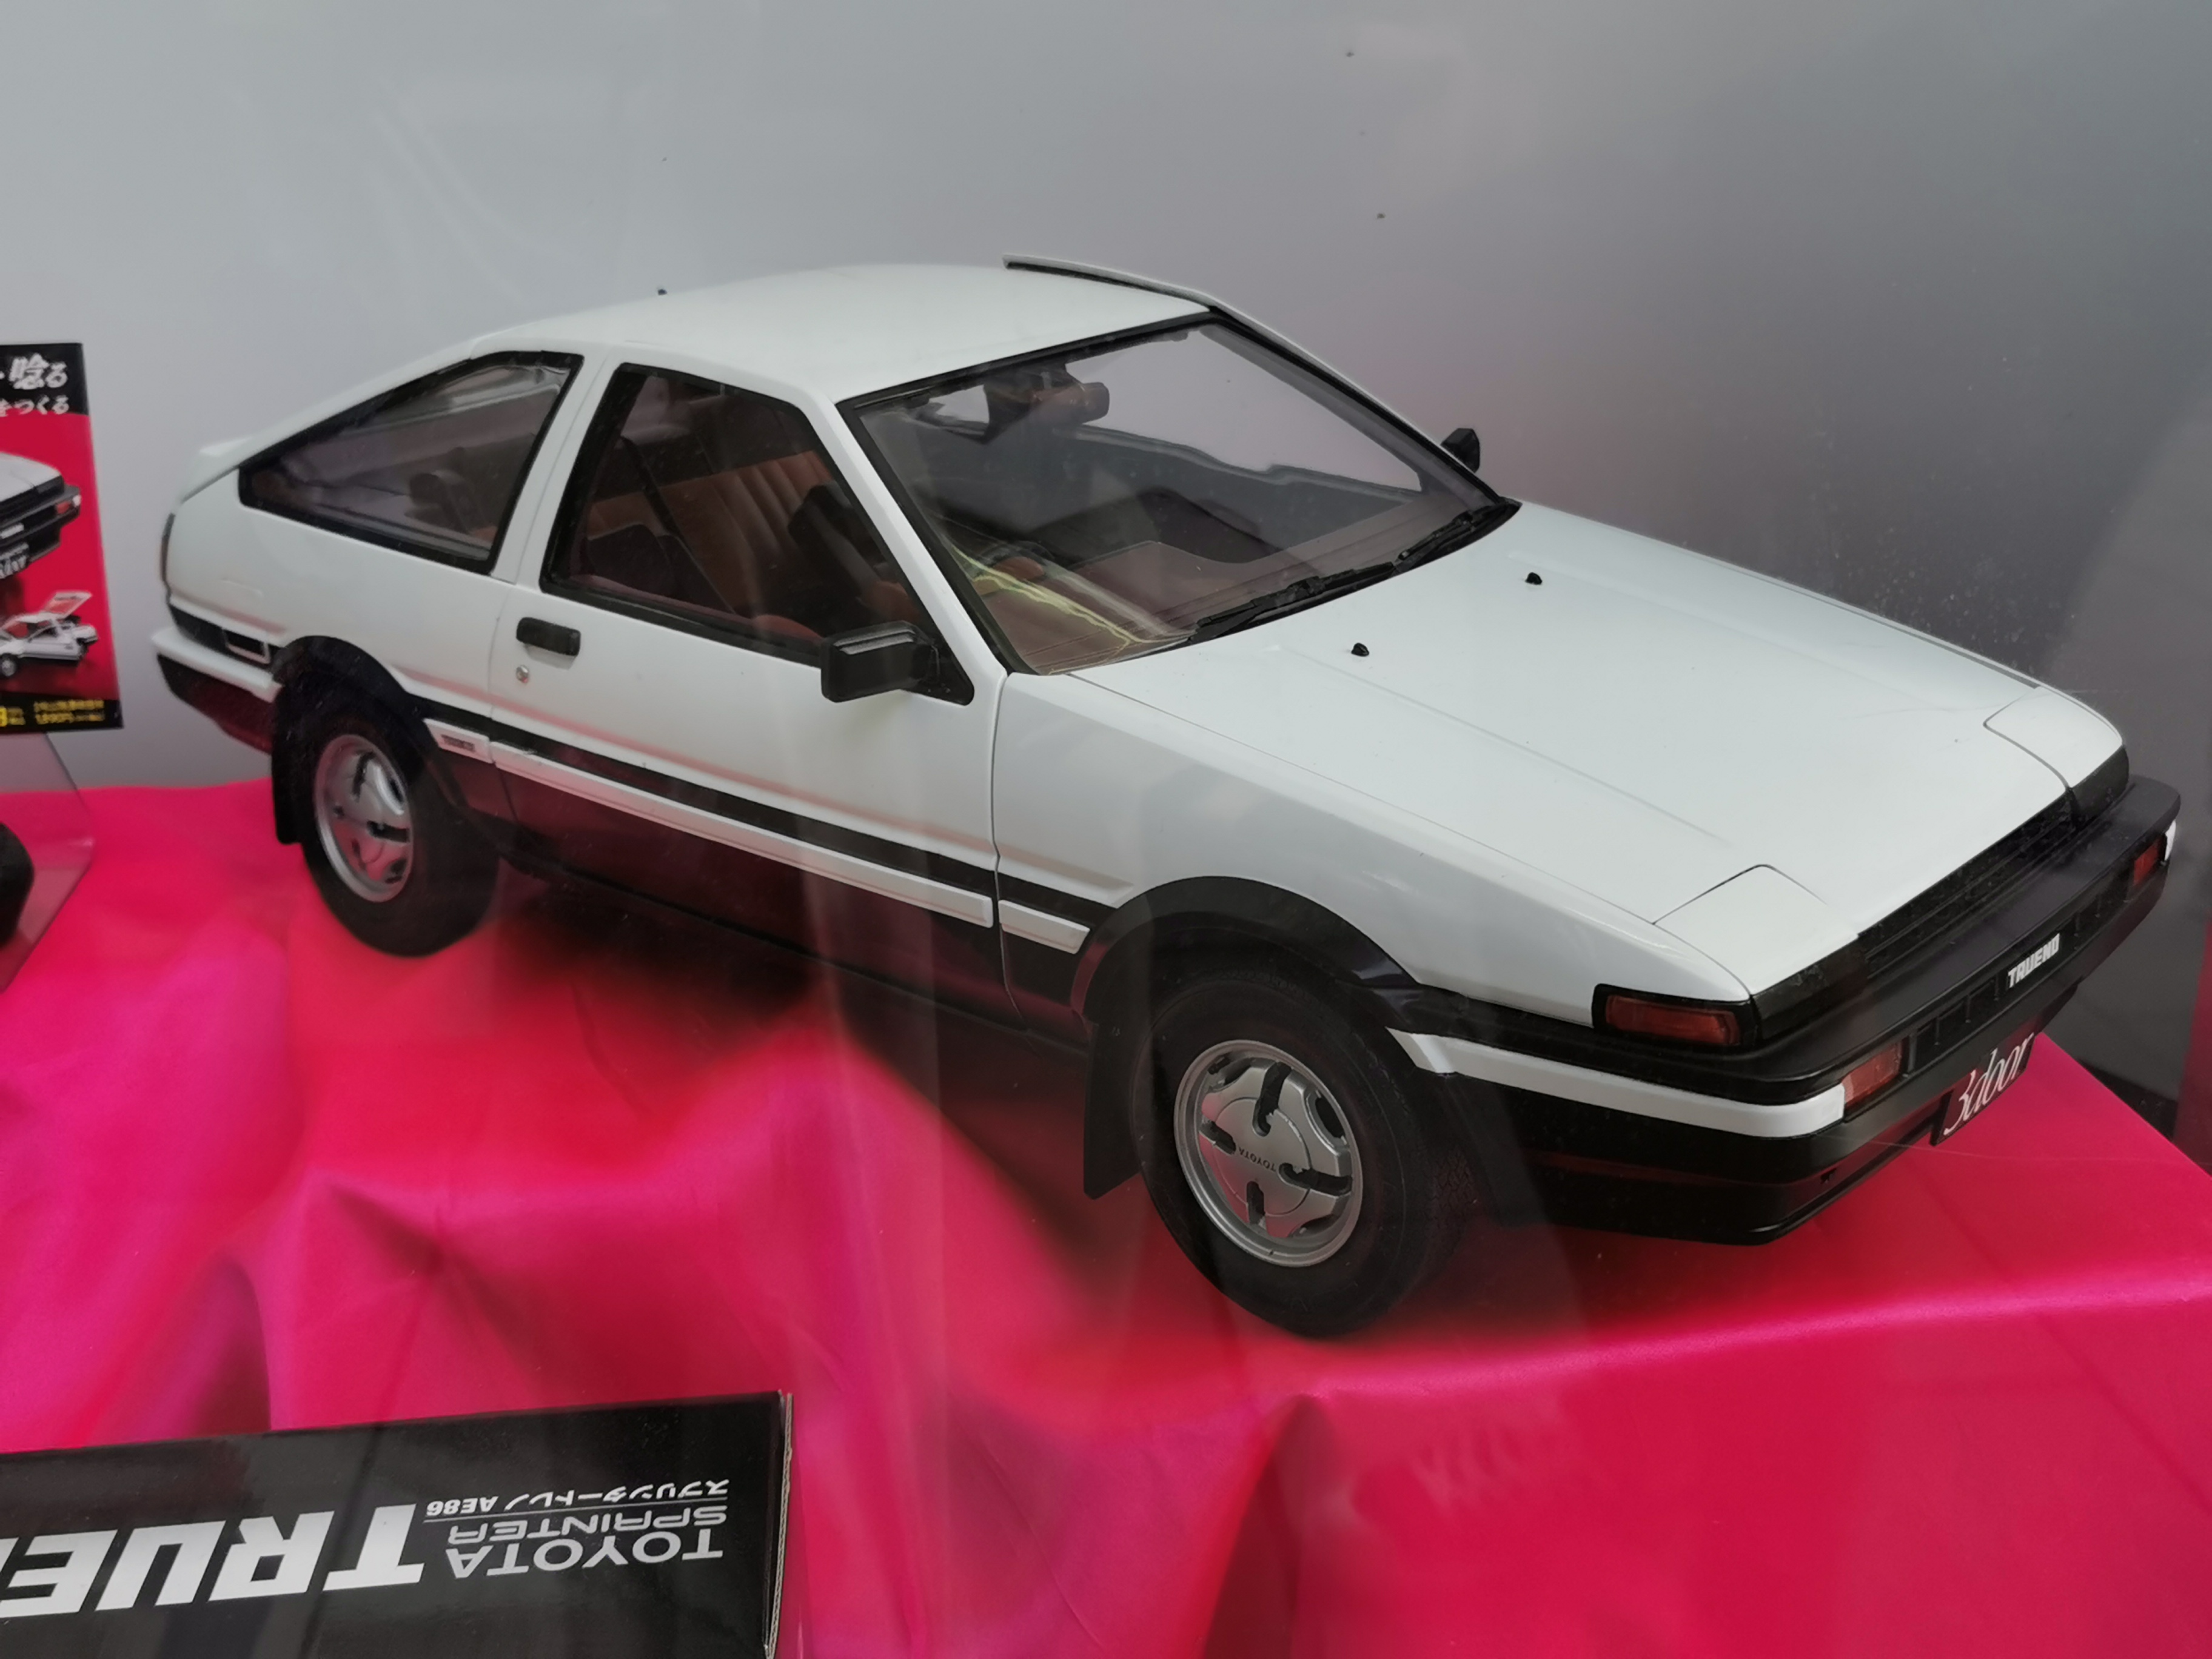 In Japan, You Can Now Buy The Best AE86 Model Ever Made